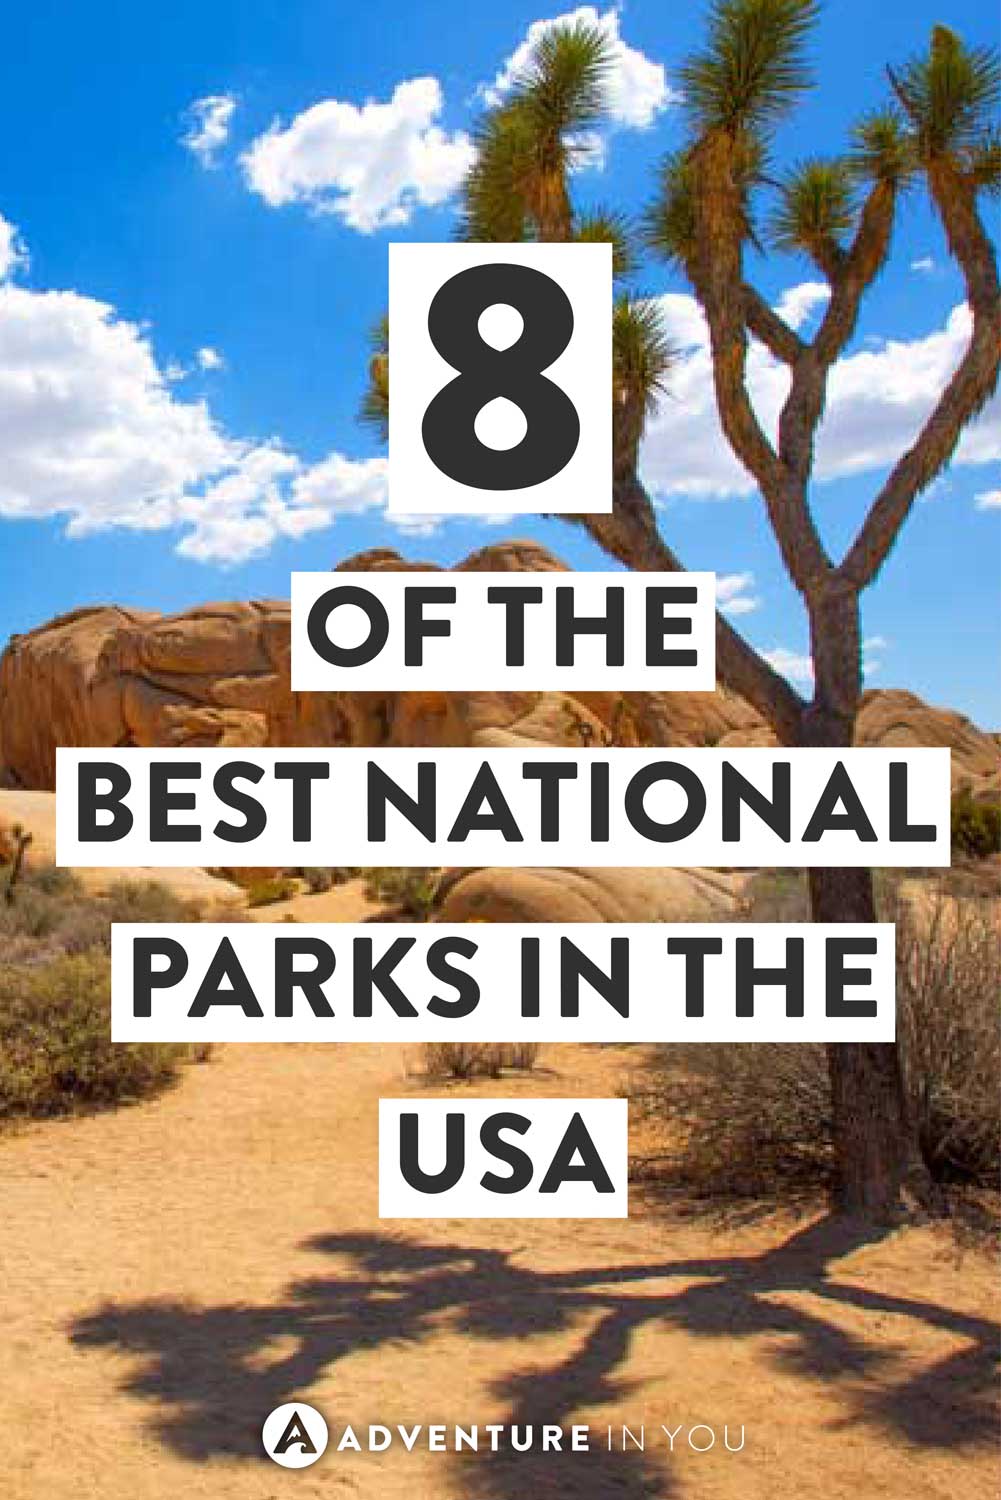 USA National Parks | Looking for the best national parks to visit? Here are 8 of the best ones that are worth adding to your bucket list! #usa #nationalparks